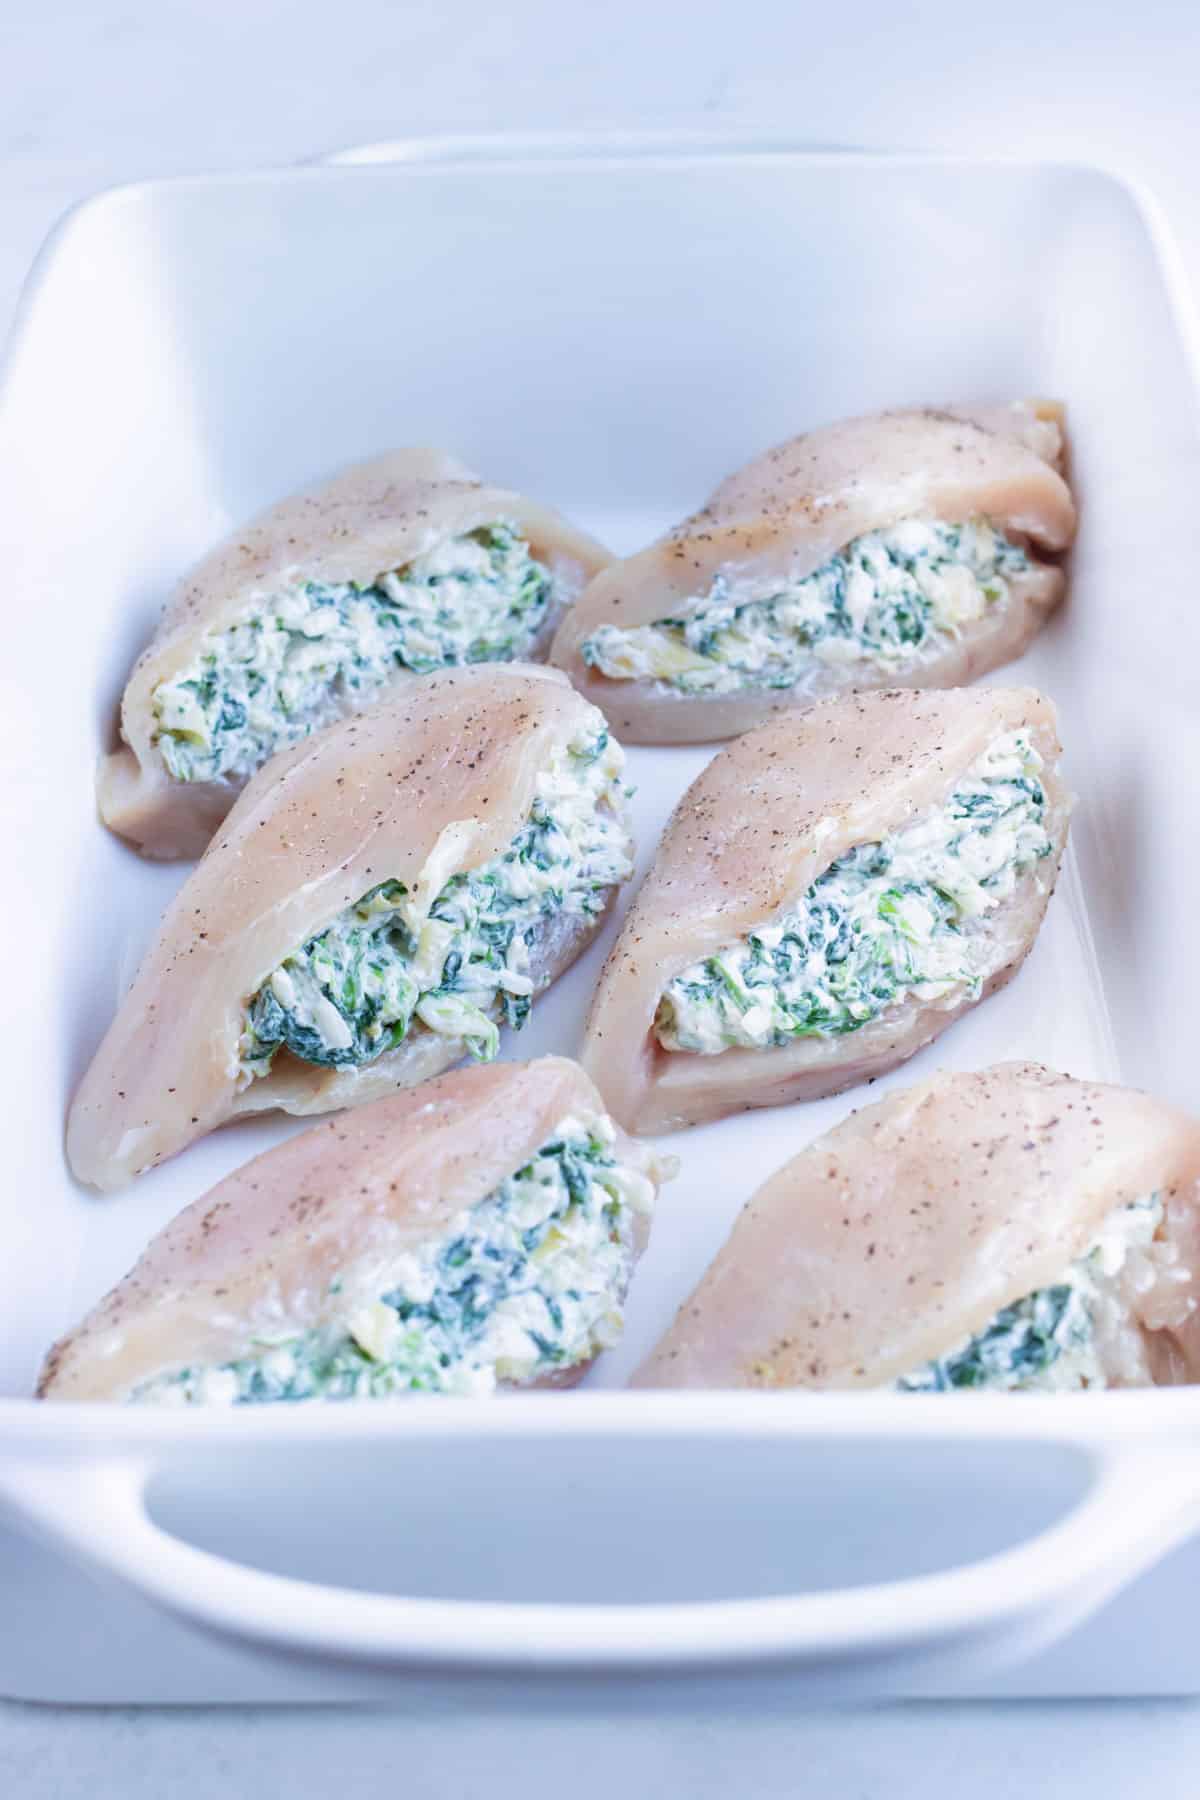 Keto friendly stuffed chicken is made in the oven for a healthy main dish.